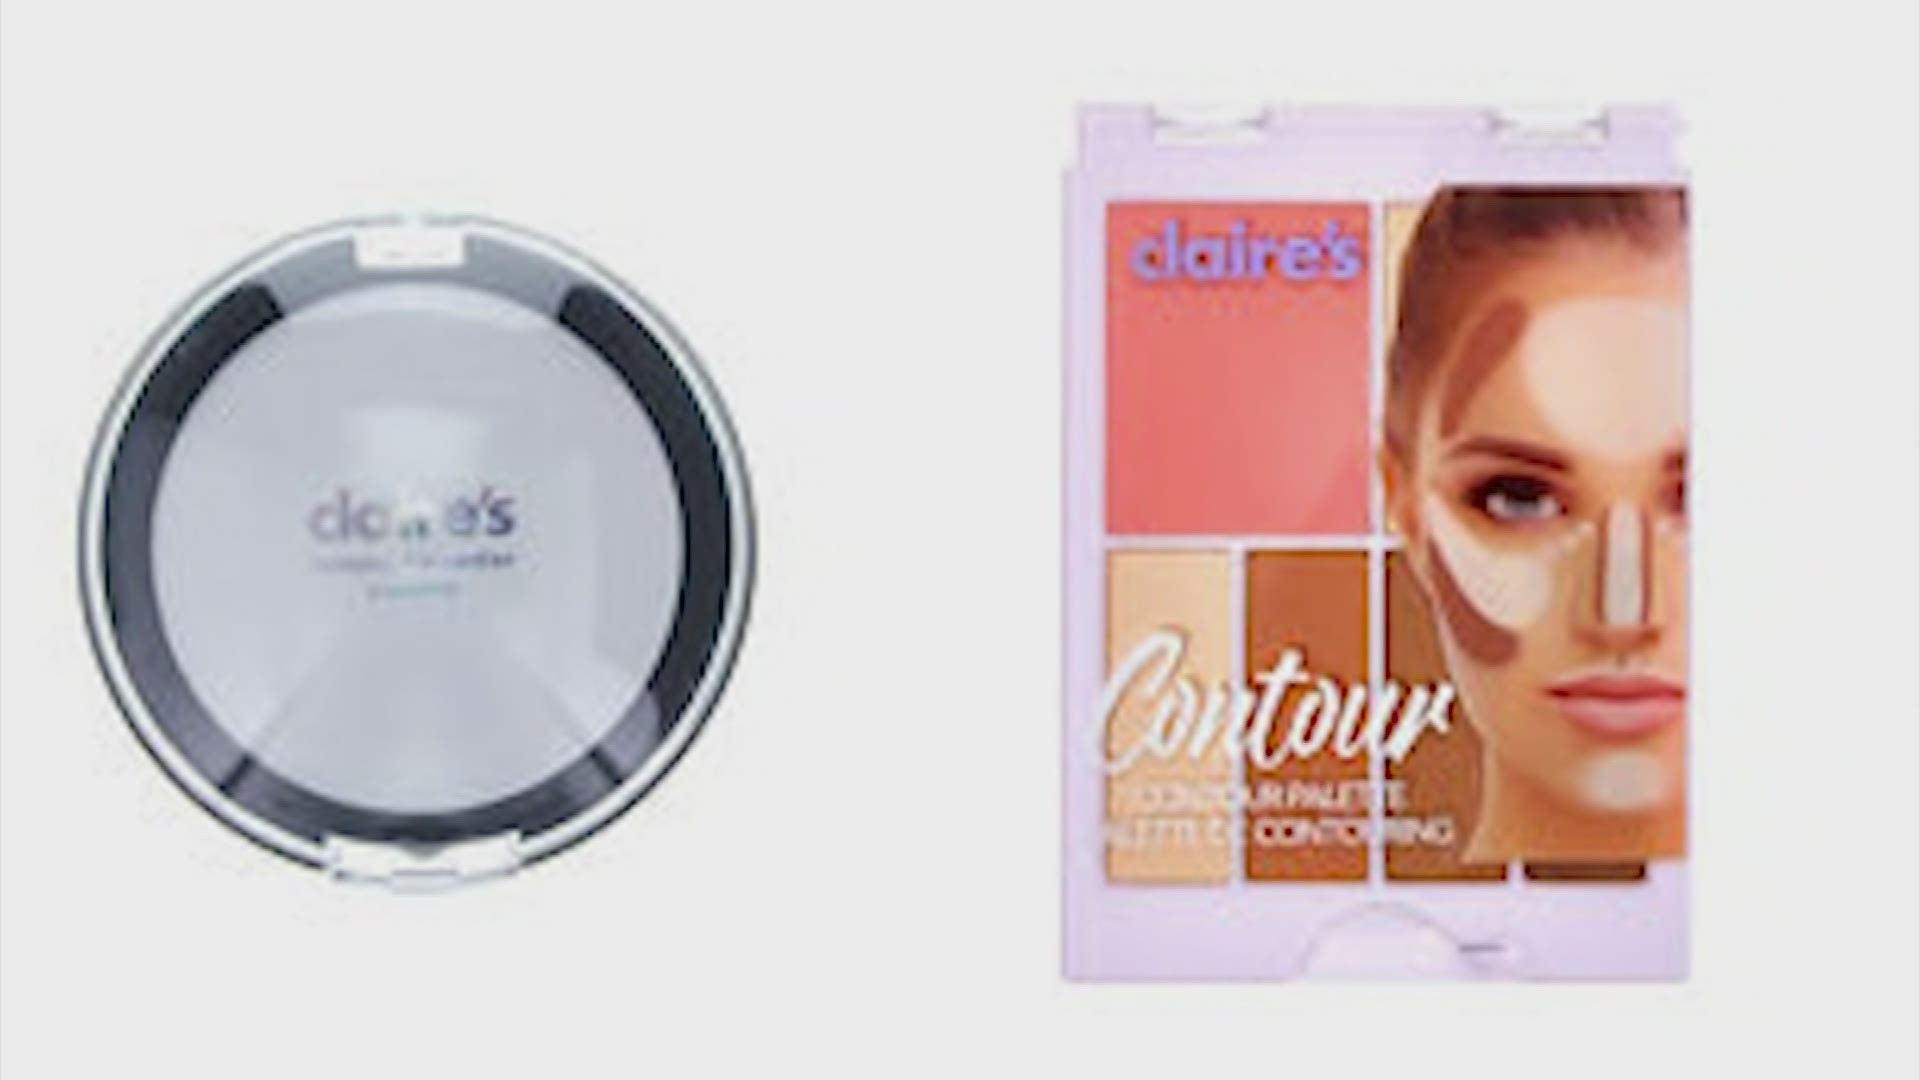 Claire's is disputing findings by U.S. regulators which warned people not to use certain makeup products after samples tested positive for asbestos.